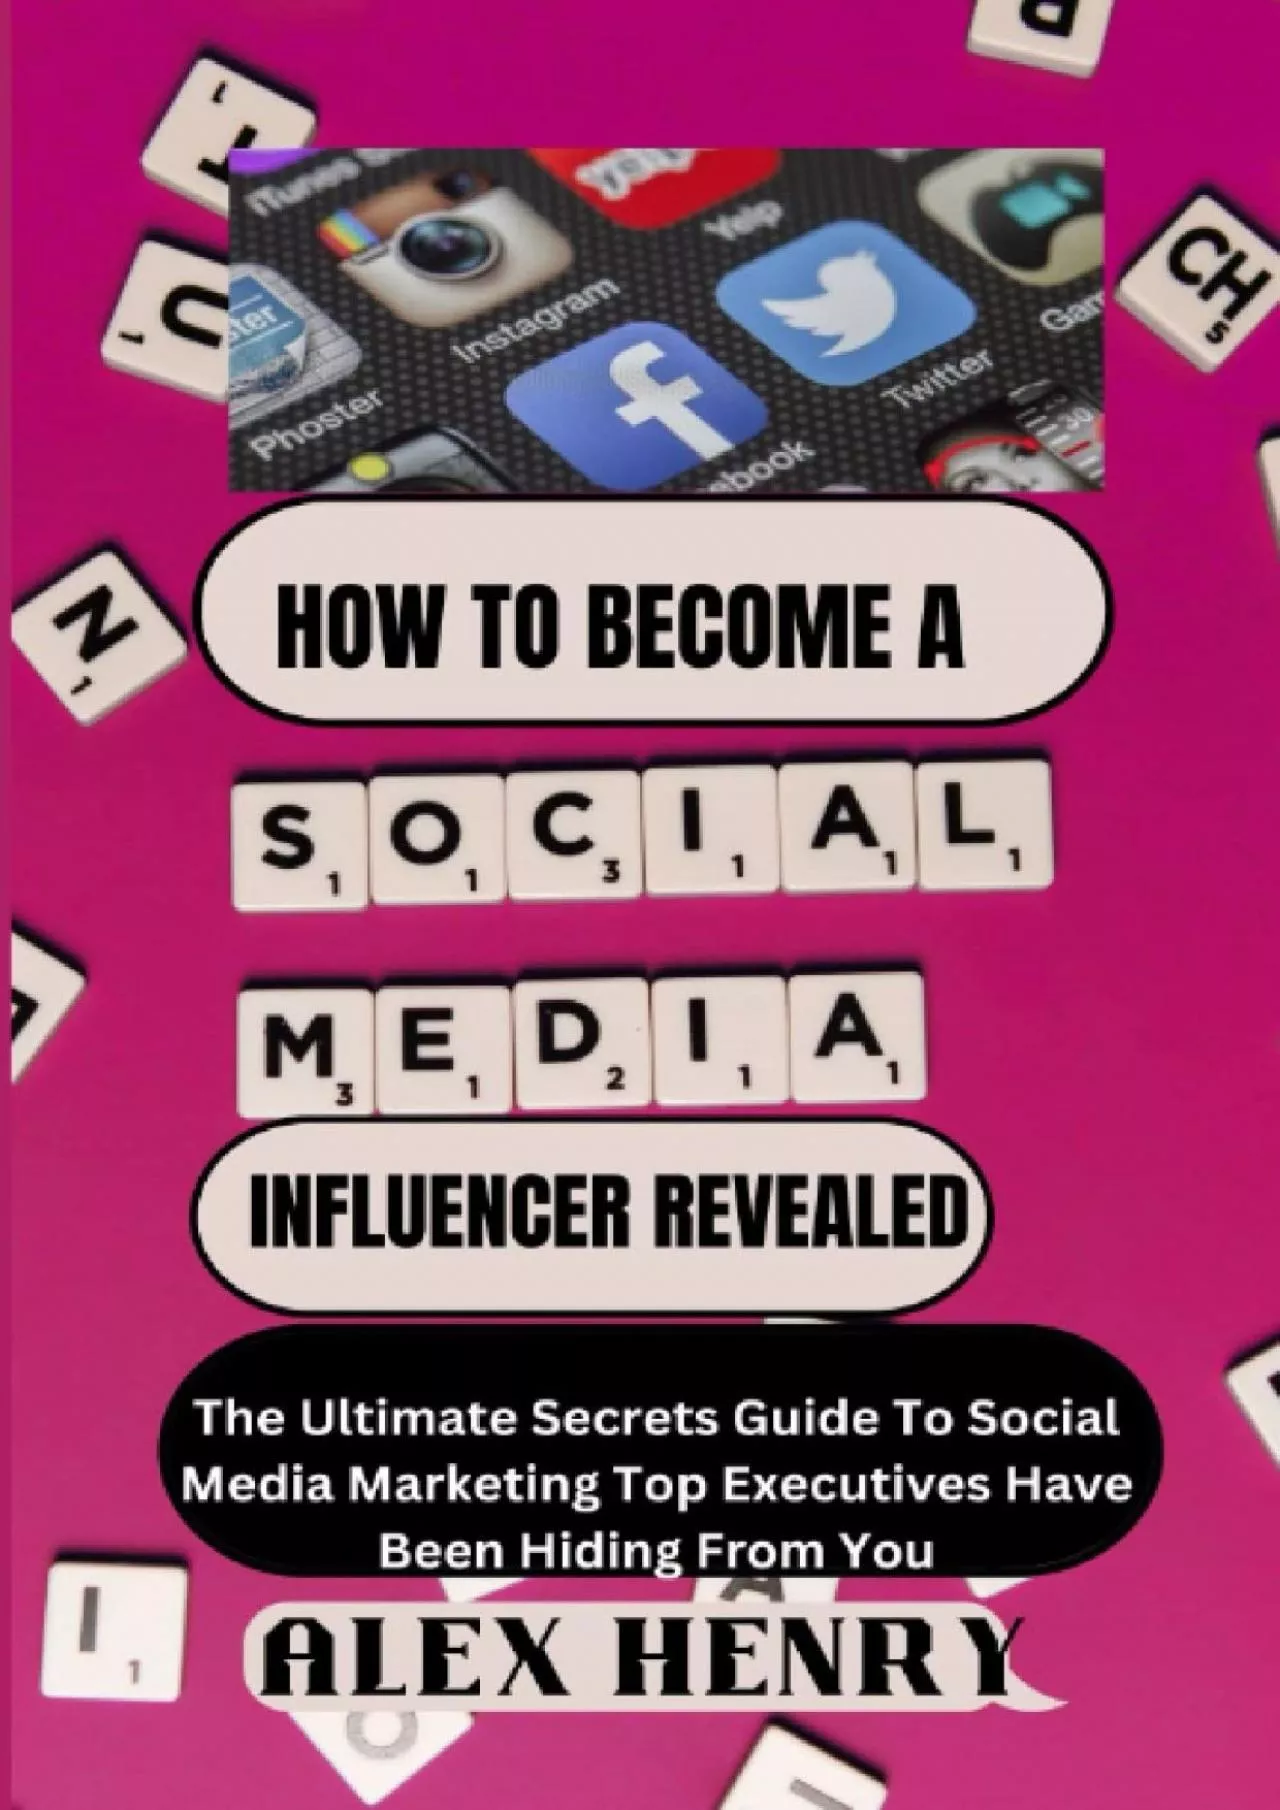 HOW TO BECOME A SUCCESSFUL SOCIAL MEDIA INFLUENCER REVEALED: The Ultimate Secrets Guide